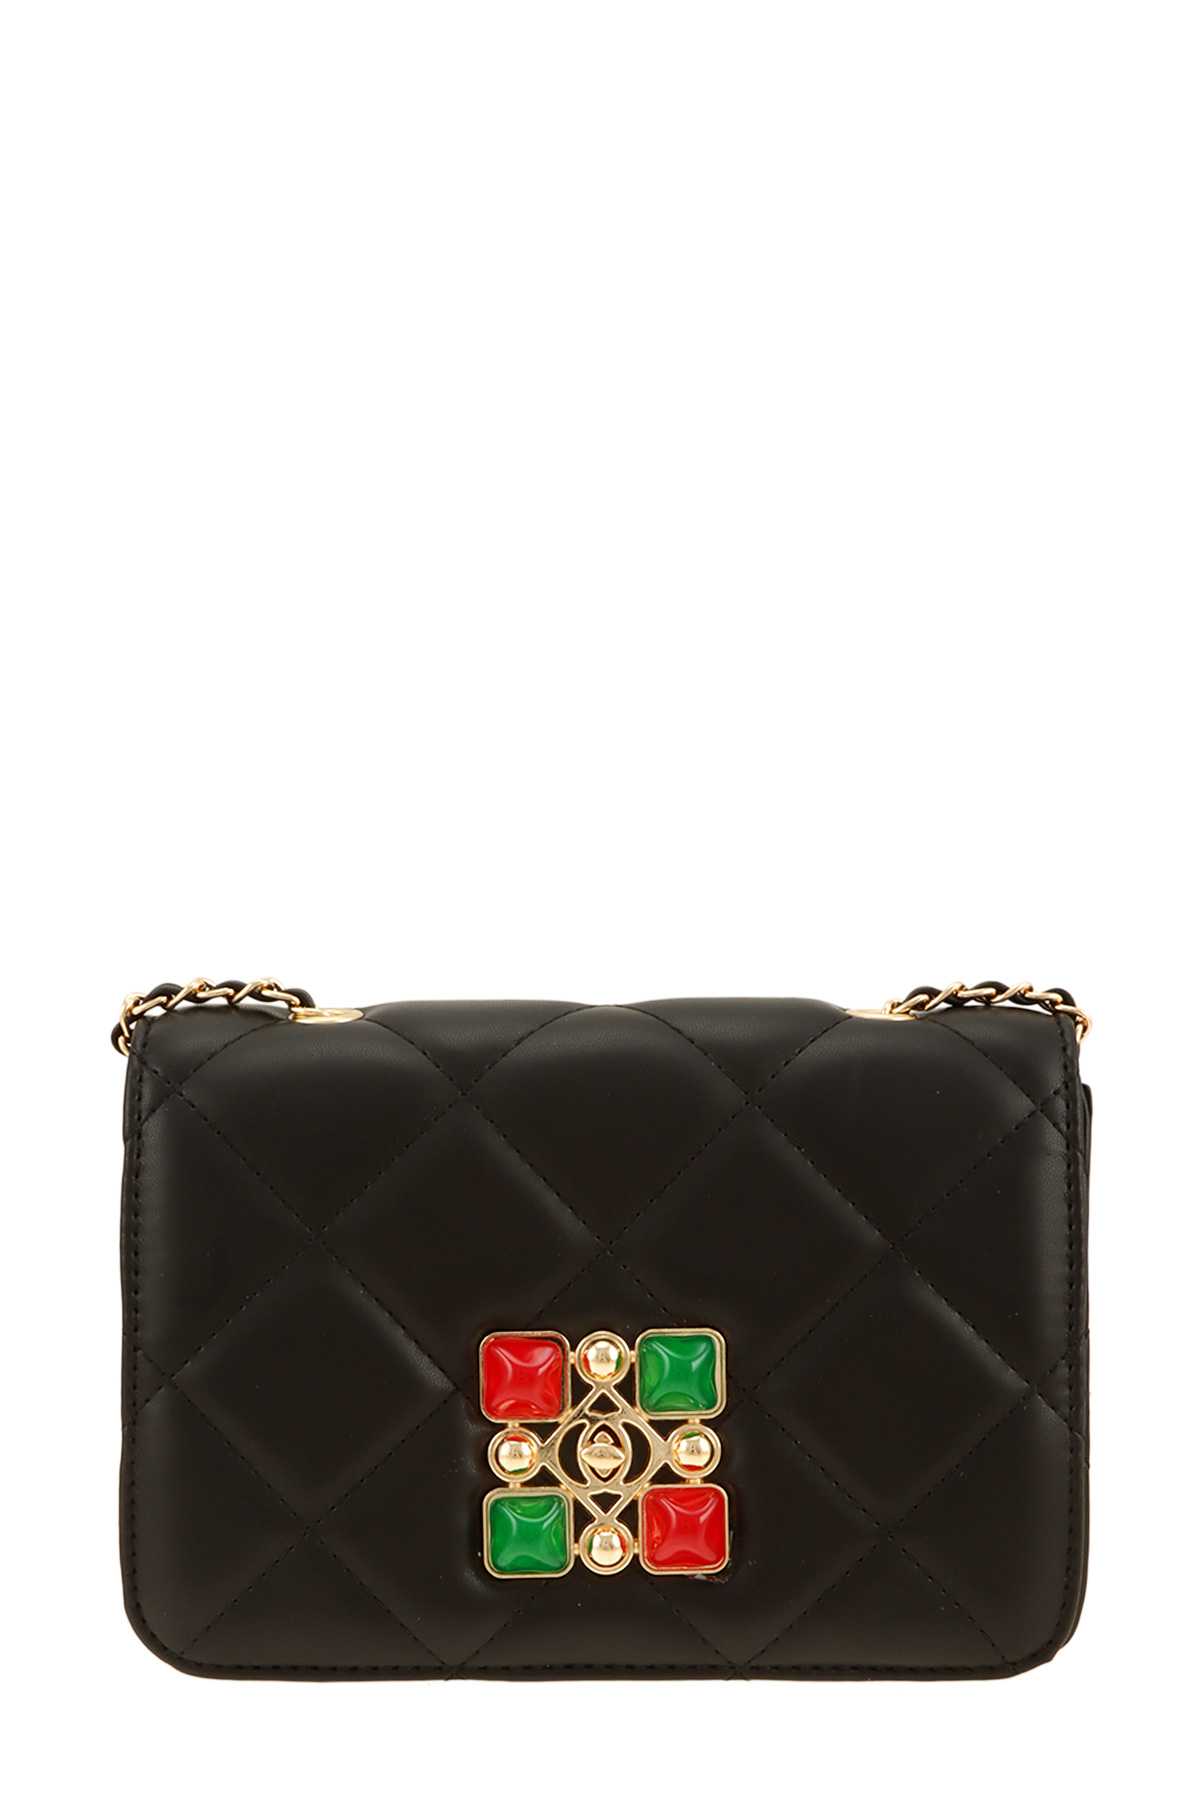 Diamond Quilted Rectangle Shape with Colorful Crystal Accent Bag